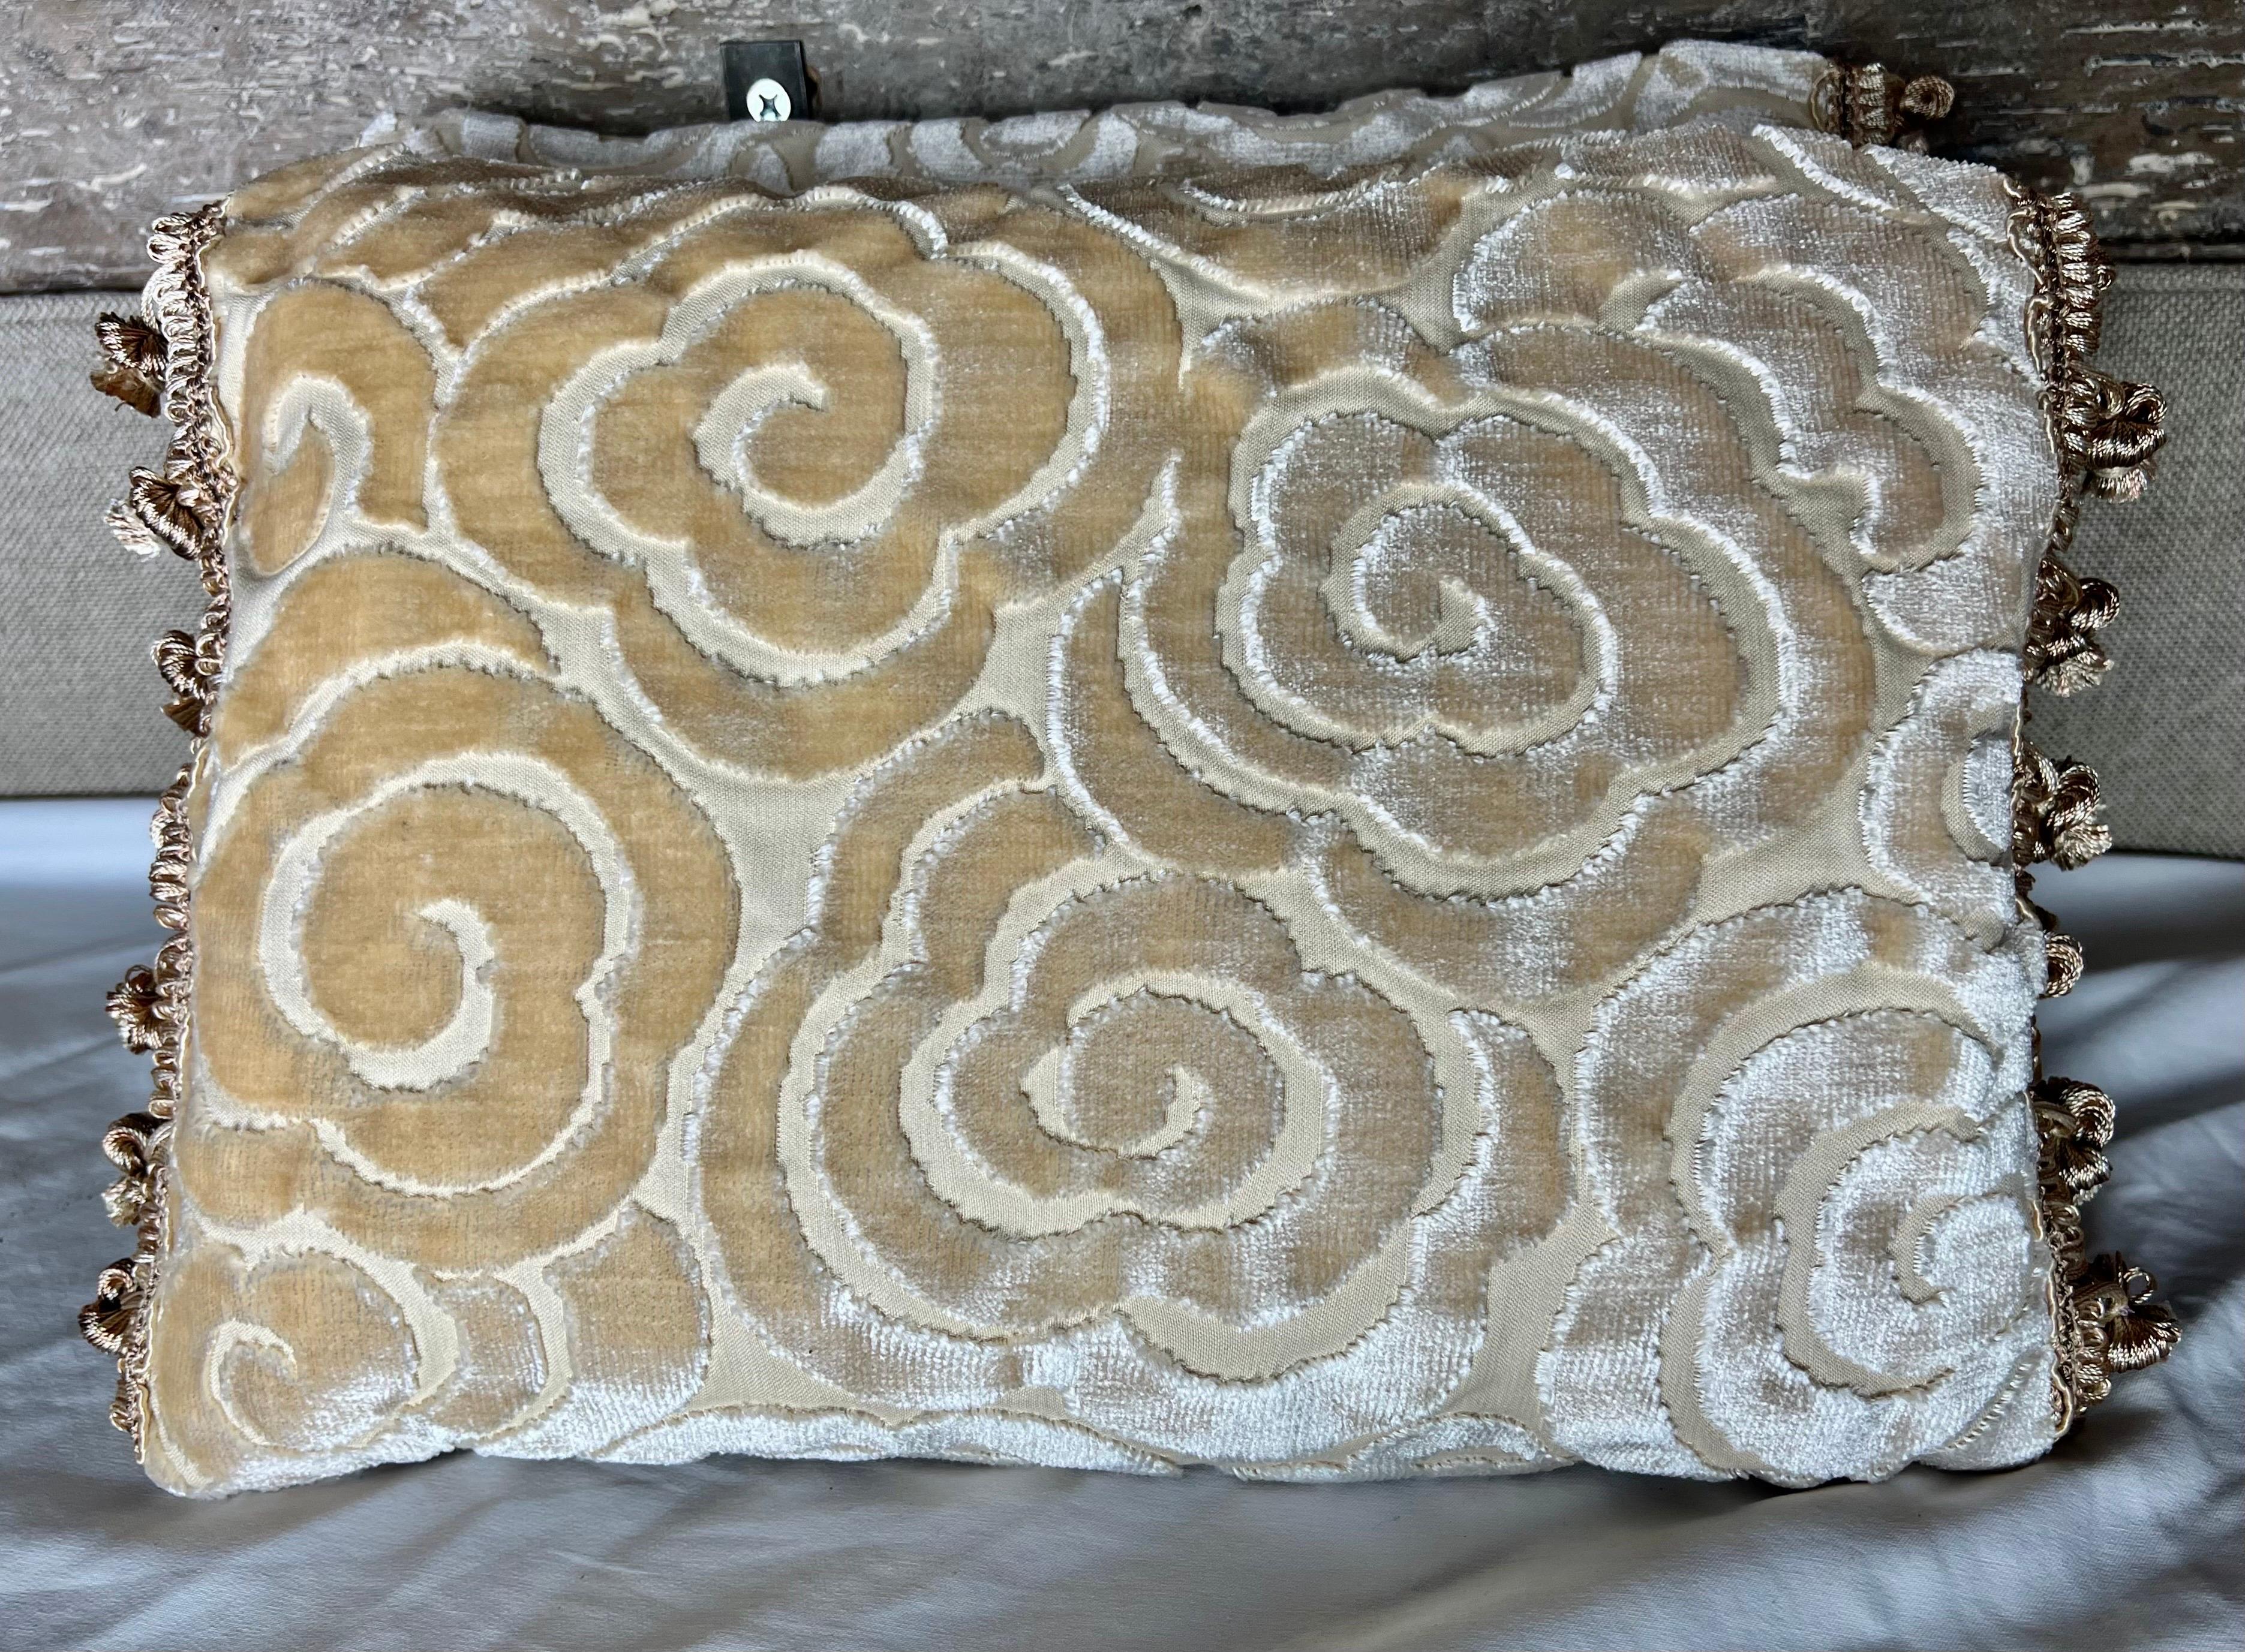 Pair of custom cream colored cut velvet floral patterned pillows with silk backs and cream tassel fringe. Down inserts, zipper closures.